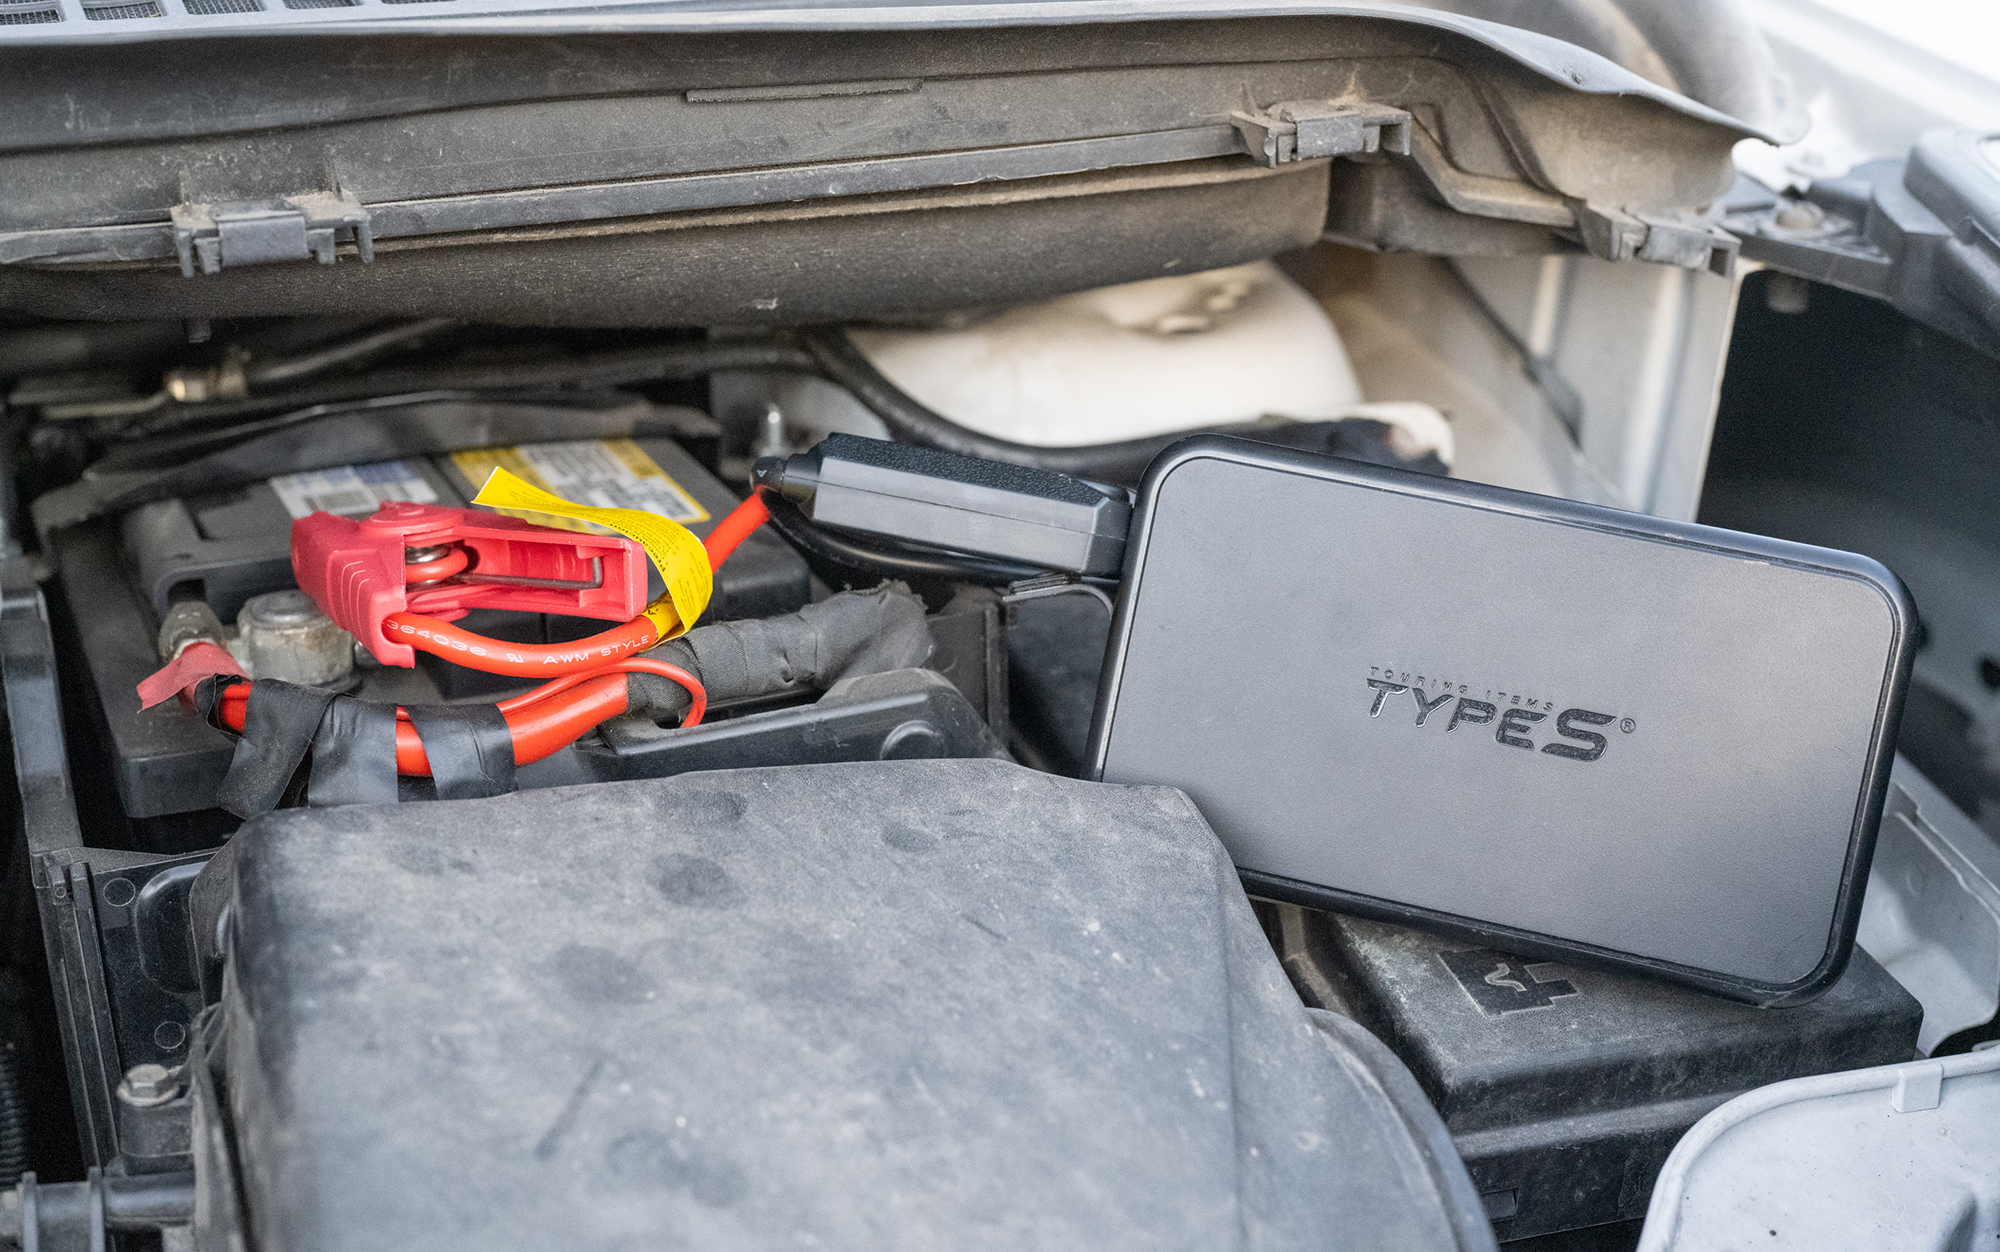 Author tests the Type S 12V 6.0L portable jump starter.